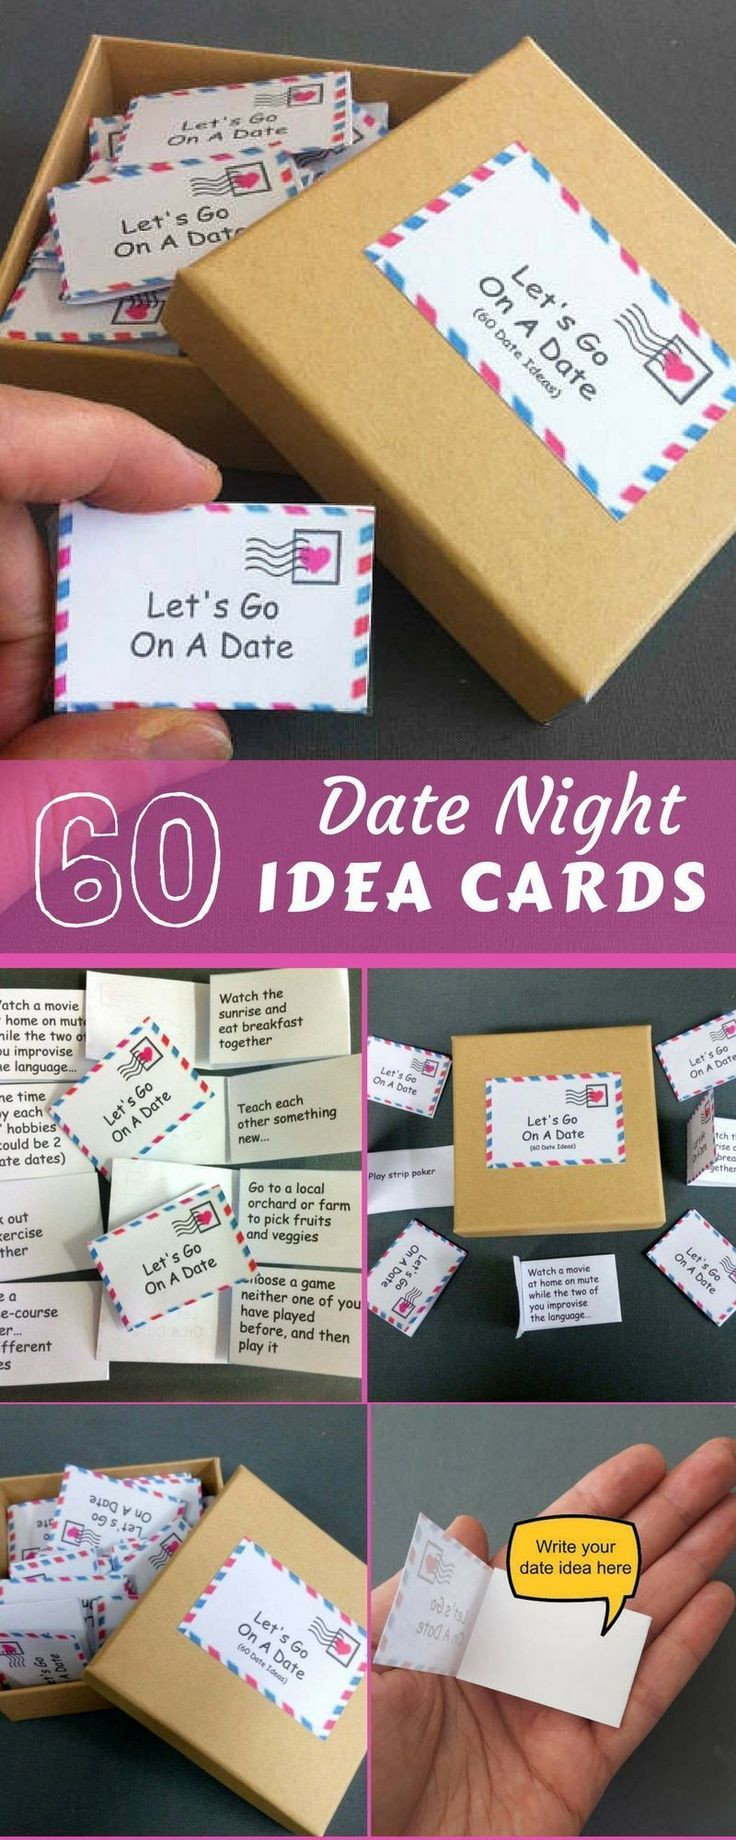 Birthday Gifts For Your Girlfriend
 Date Night Box 60 Date Night Ideas Romantic Gift For